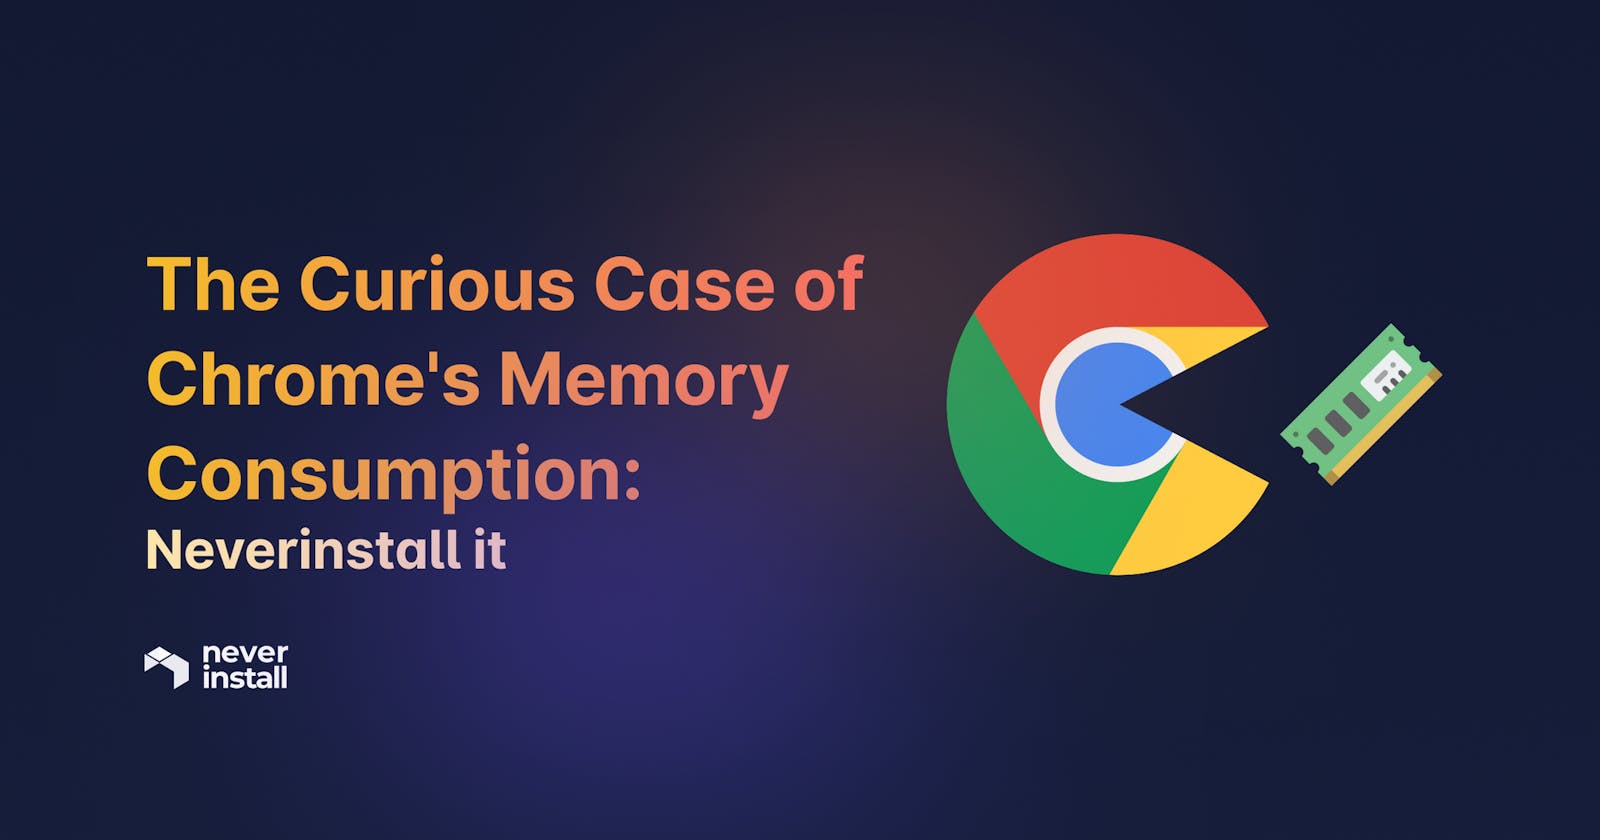 The Curious Case of Chrome's Memory Consumption - Neverinstall it